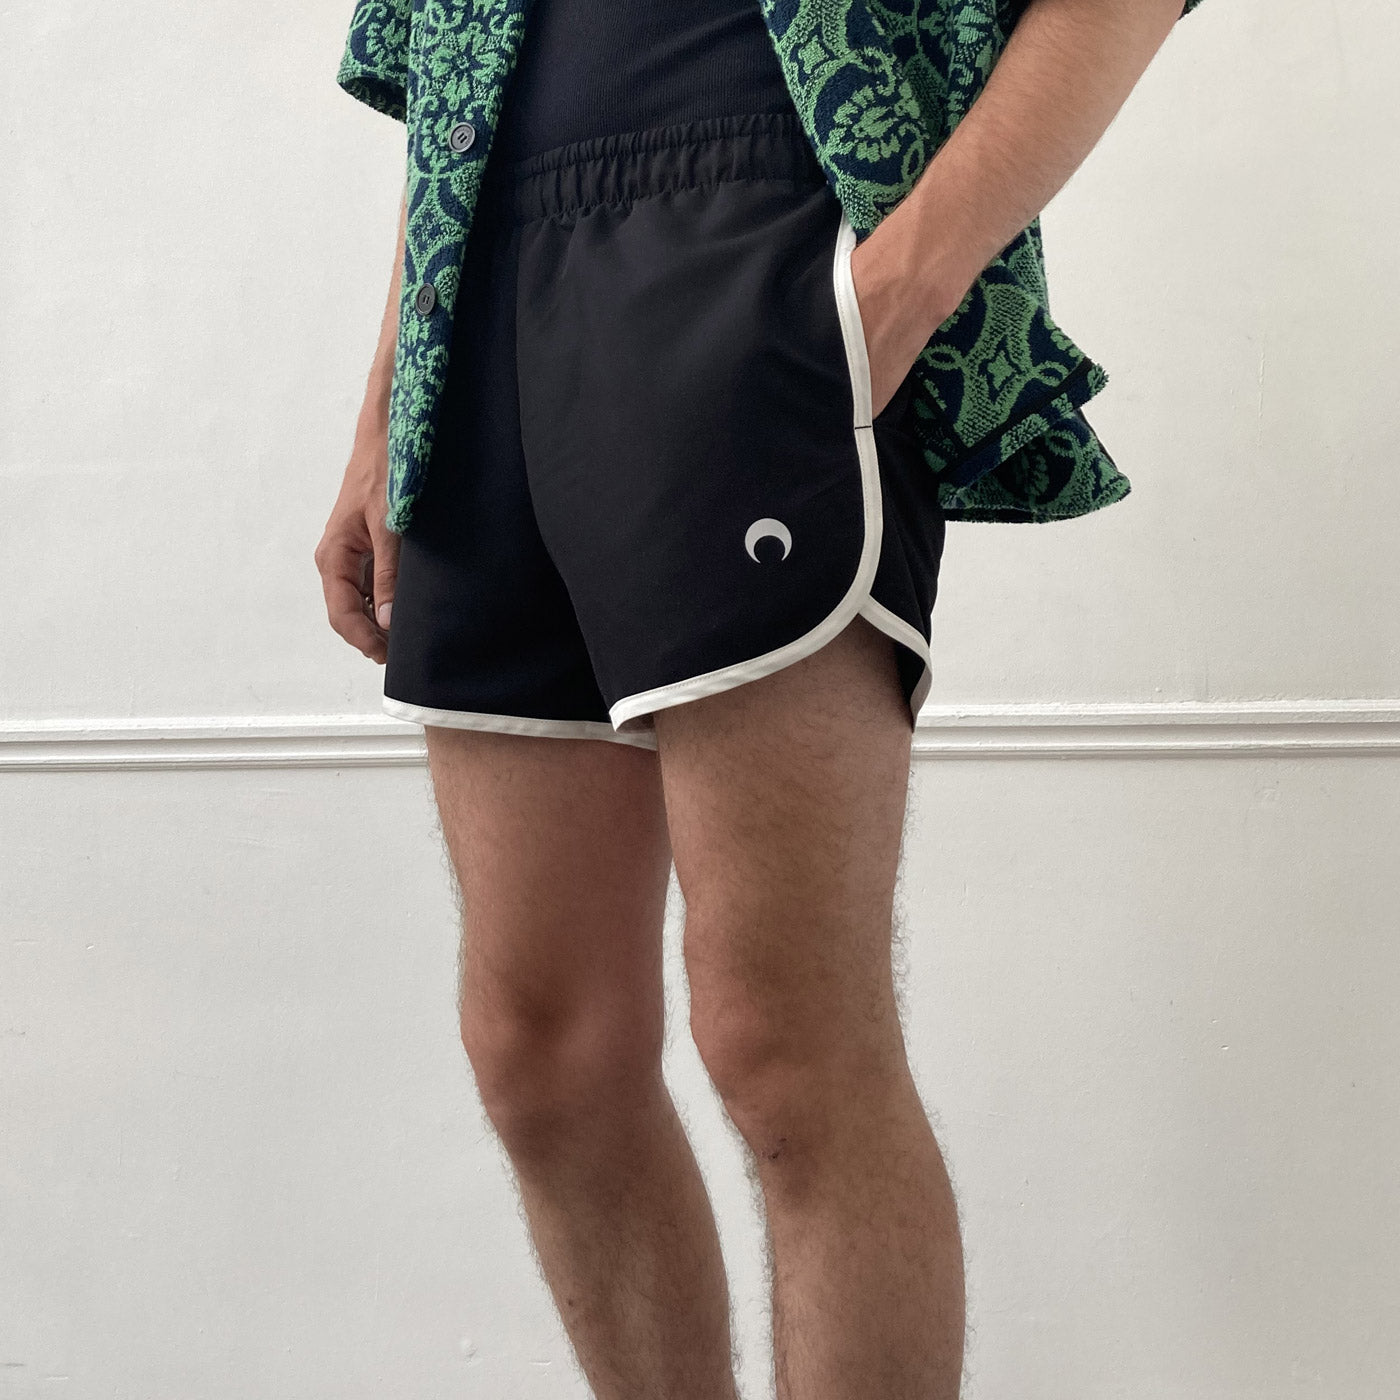 Vintage style running short in black with white piping and Marine Serre embroidered logo on front left thigh - showroom model.